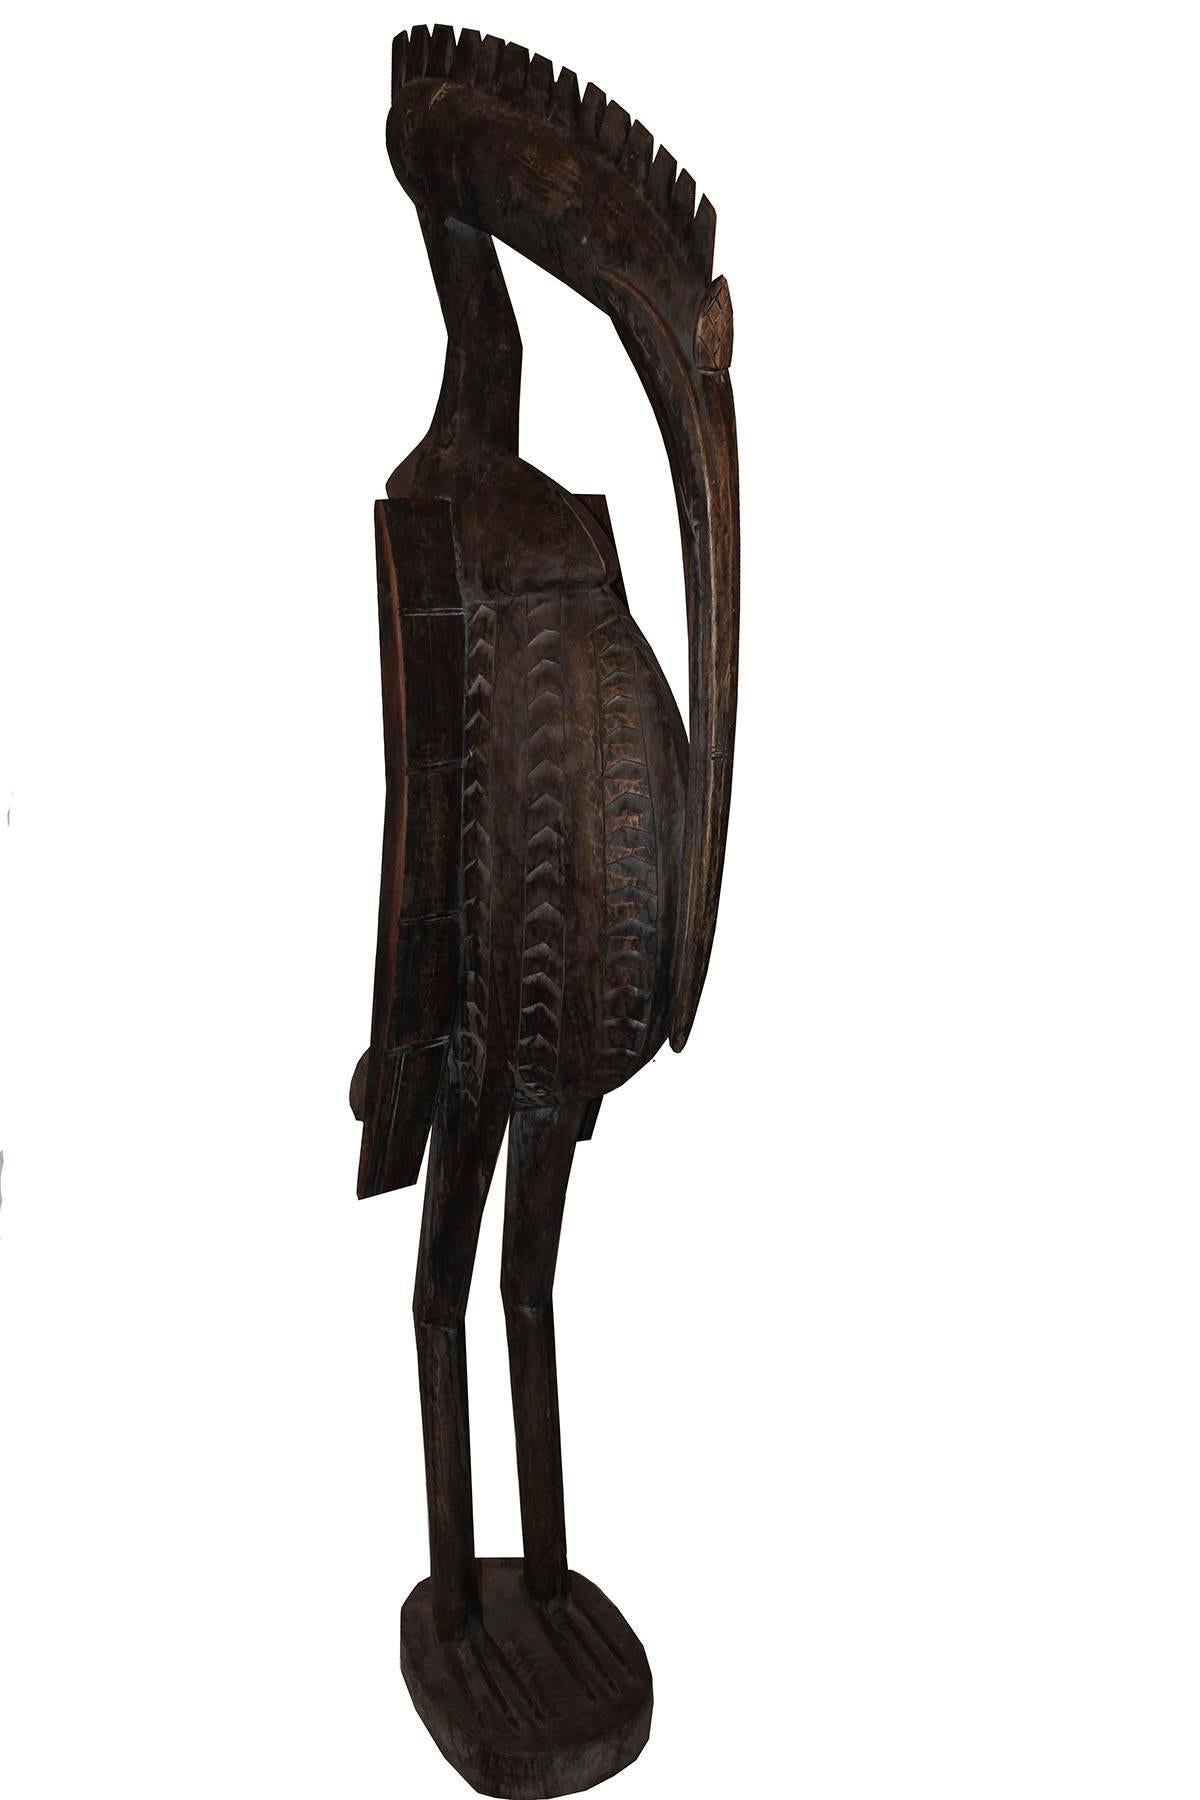 Standing over 5 foot 3 inches this is a unique piece. The Senufo people of West Africa call these statues porpianong, referring to the hornbill as the “master among the birds.” Hornbills mate for life and share equally in the raising of their young